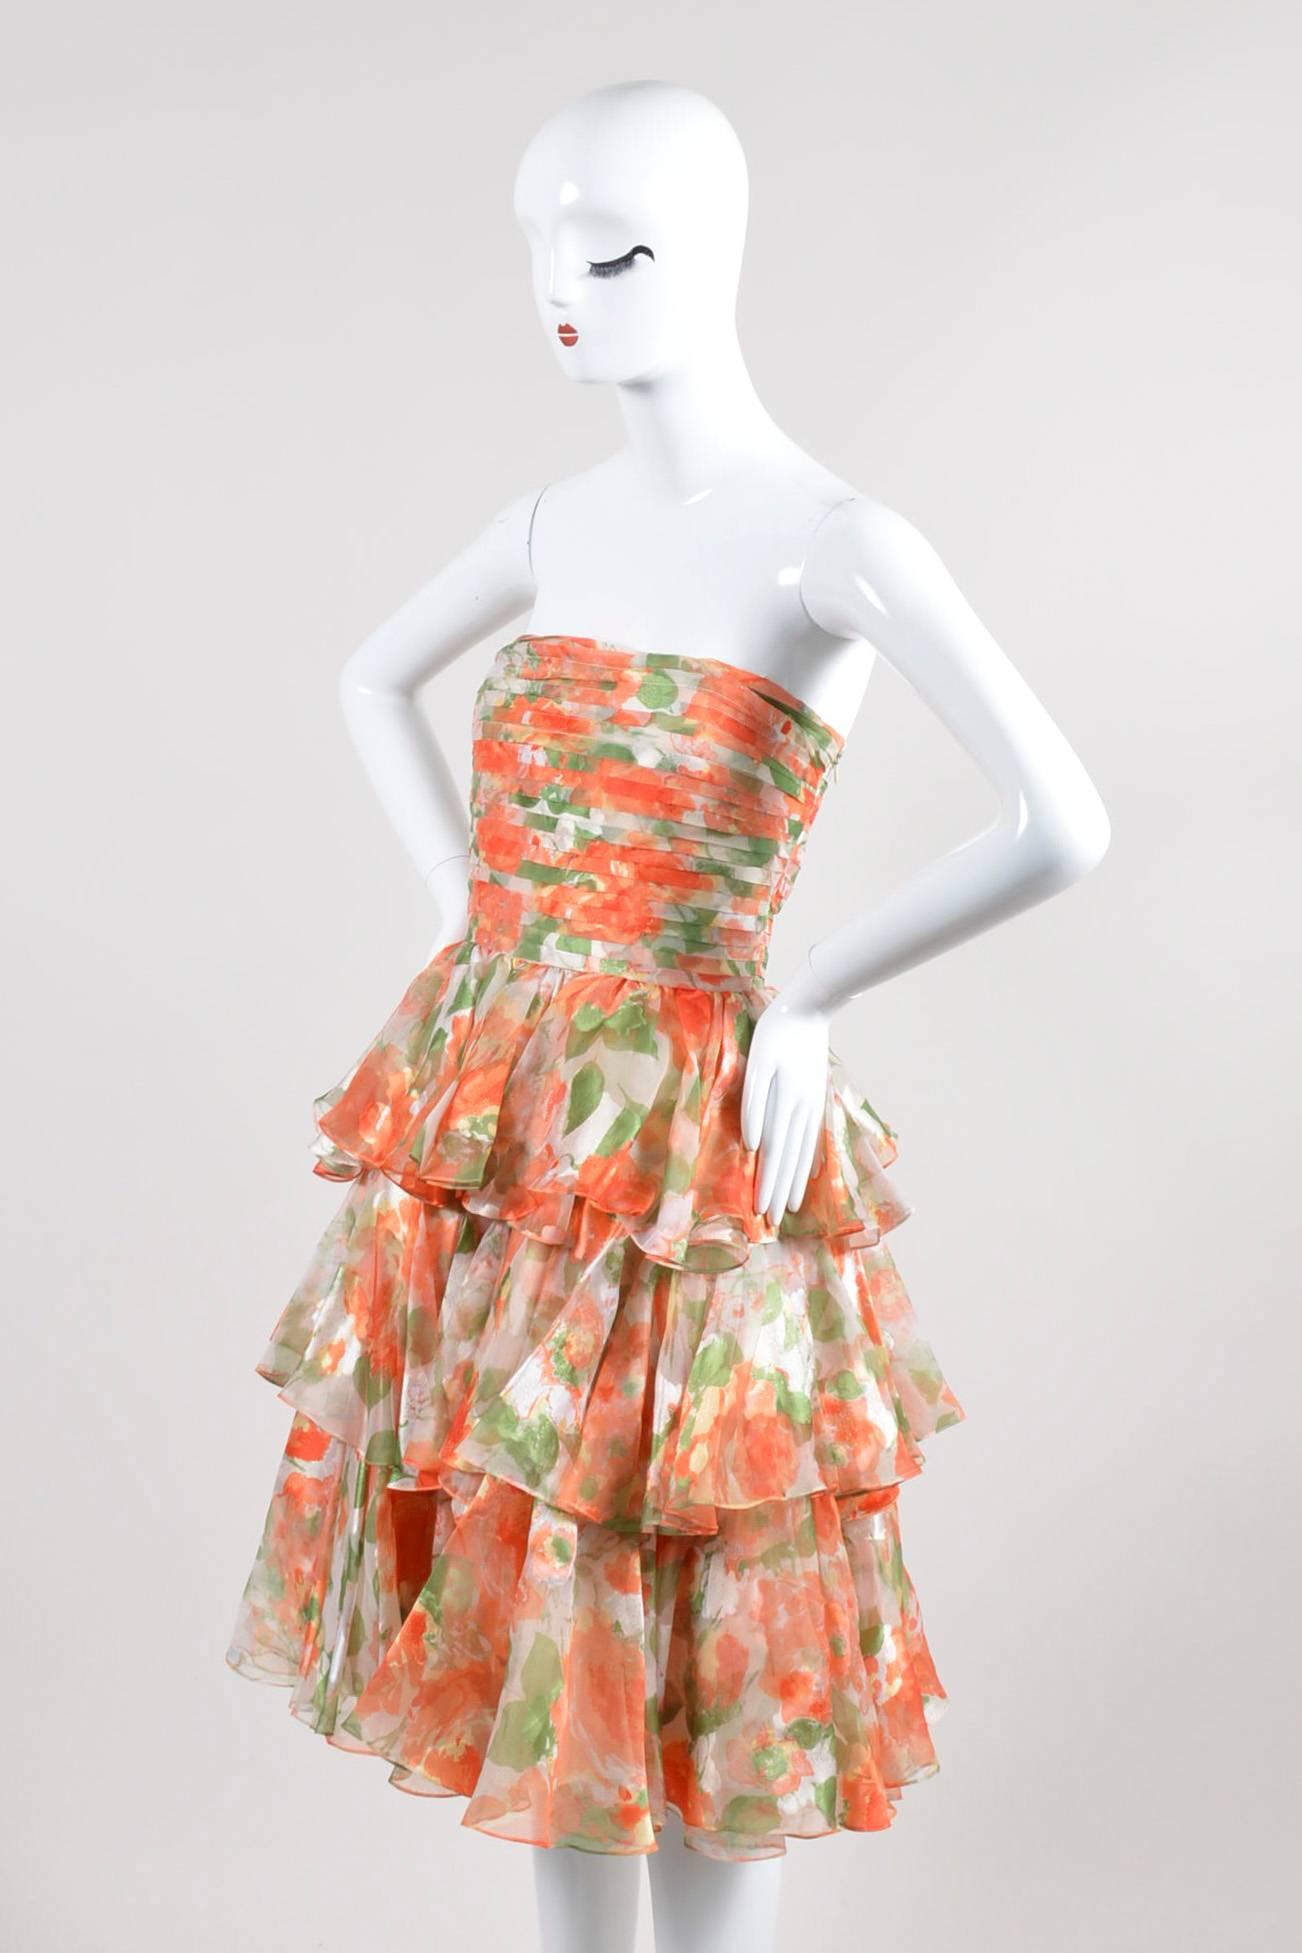 Eye-catching vintage dress by Oscar de la Renta in a bright floral print. Shades of coral orange, green, white, and yellow throughout. Pleated bust area and tiered ruffle skirt. Interior belt for fit and shape. Hits approximately above the knee.